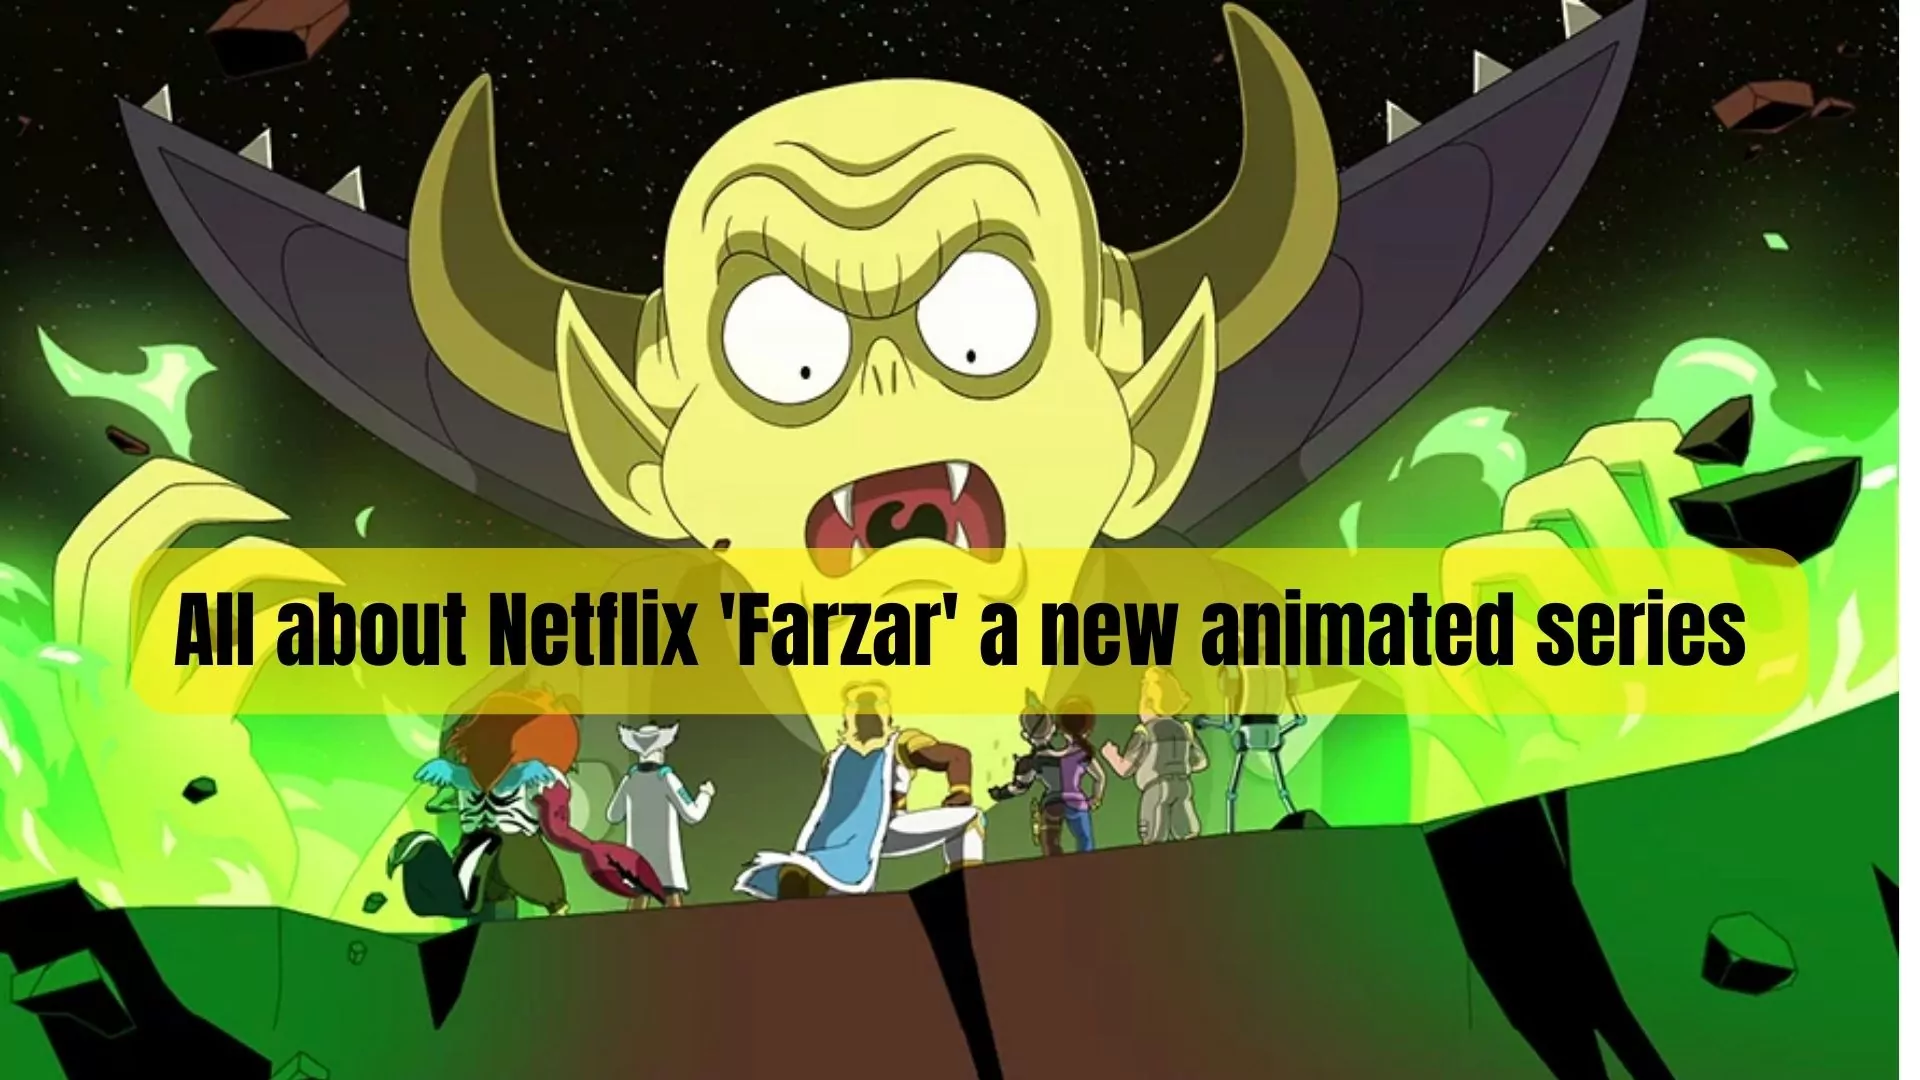 All about Netflix 'Farzar' a new animated series